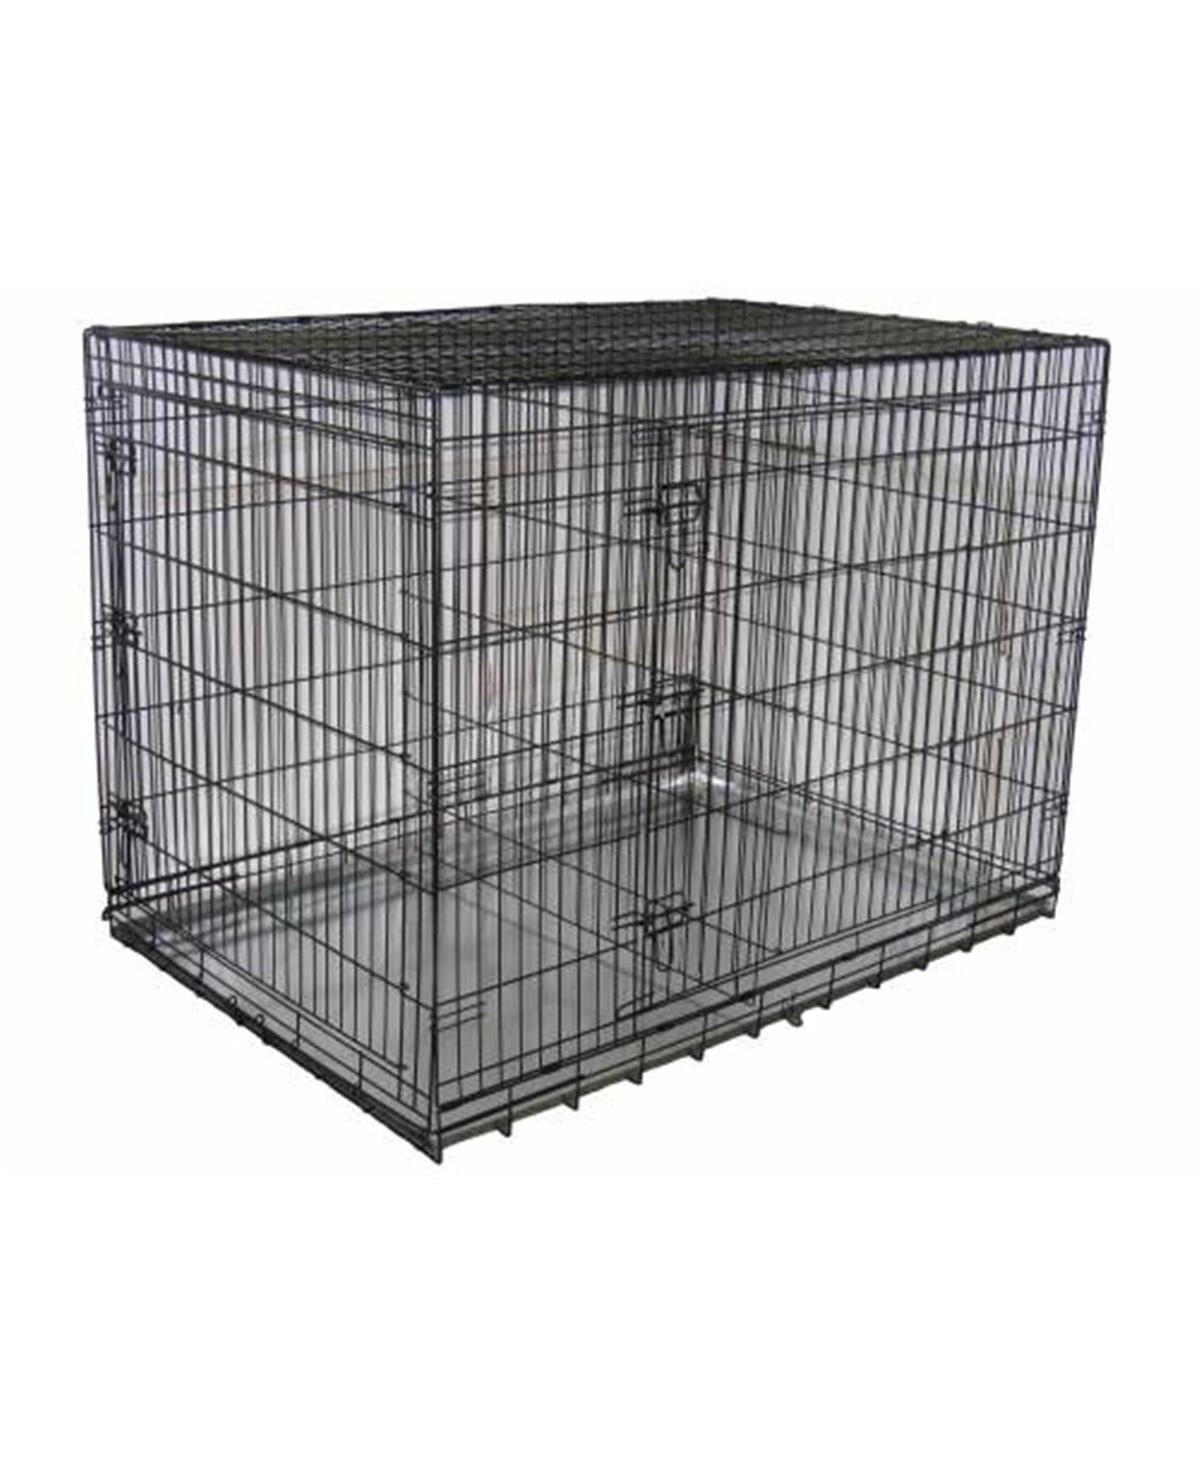 Mld-54 54 in. Metal Dog Crate with Divider - Open miscellaneous